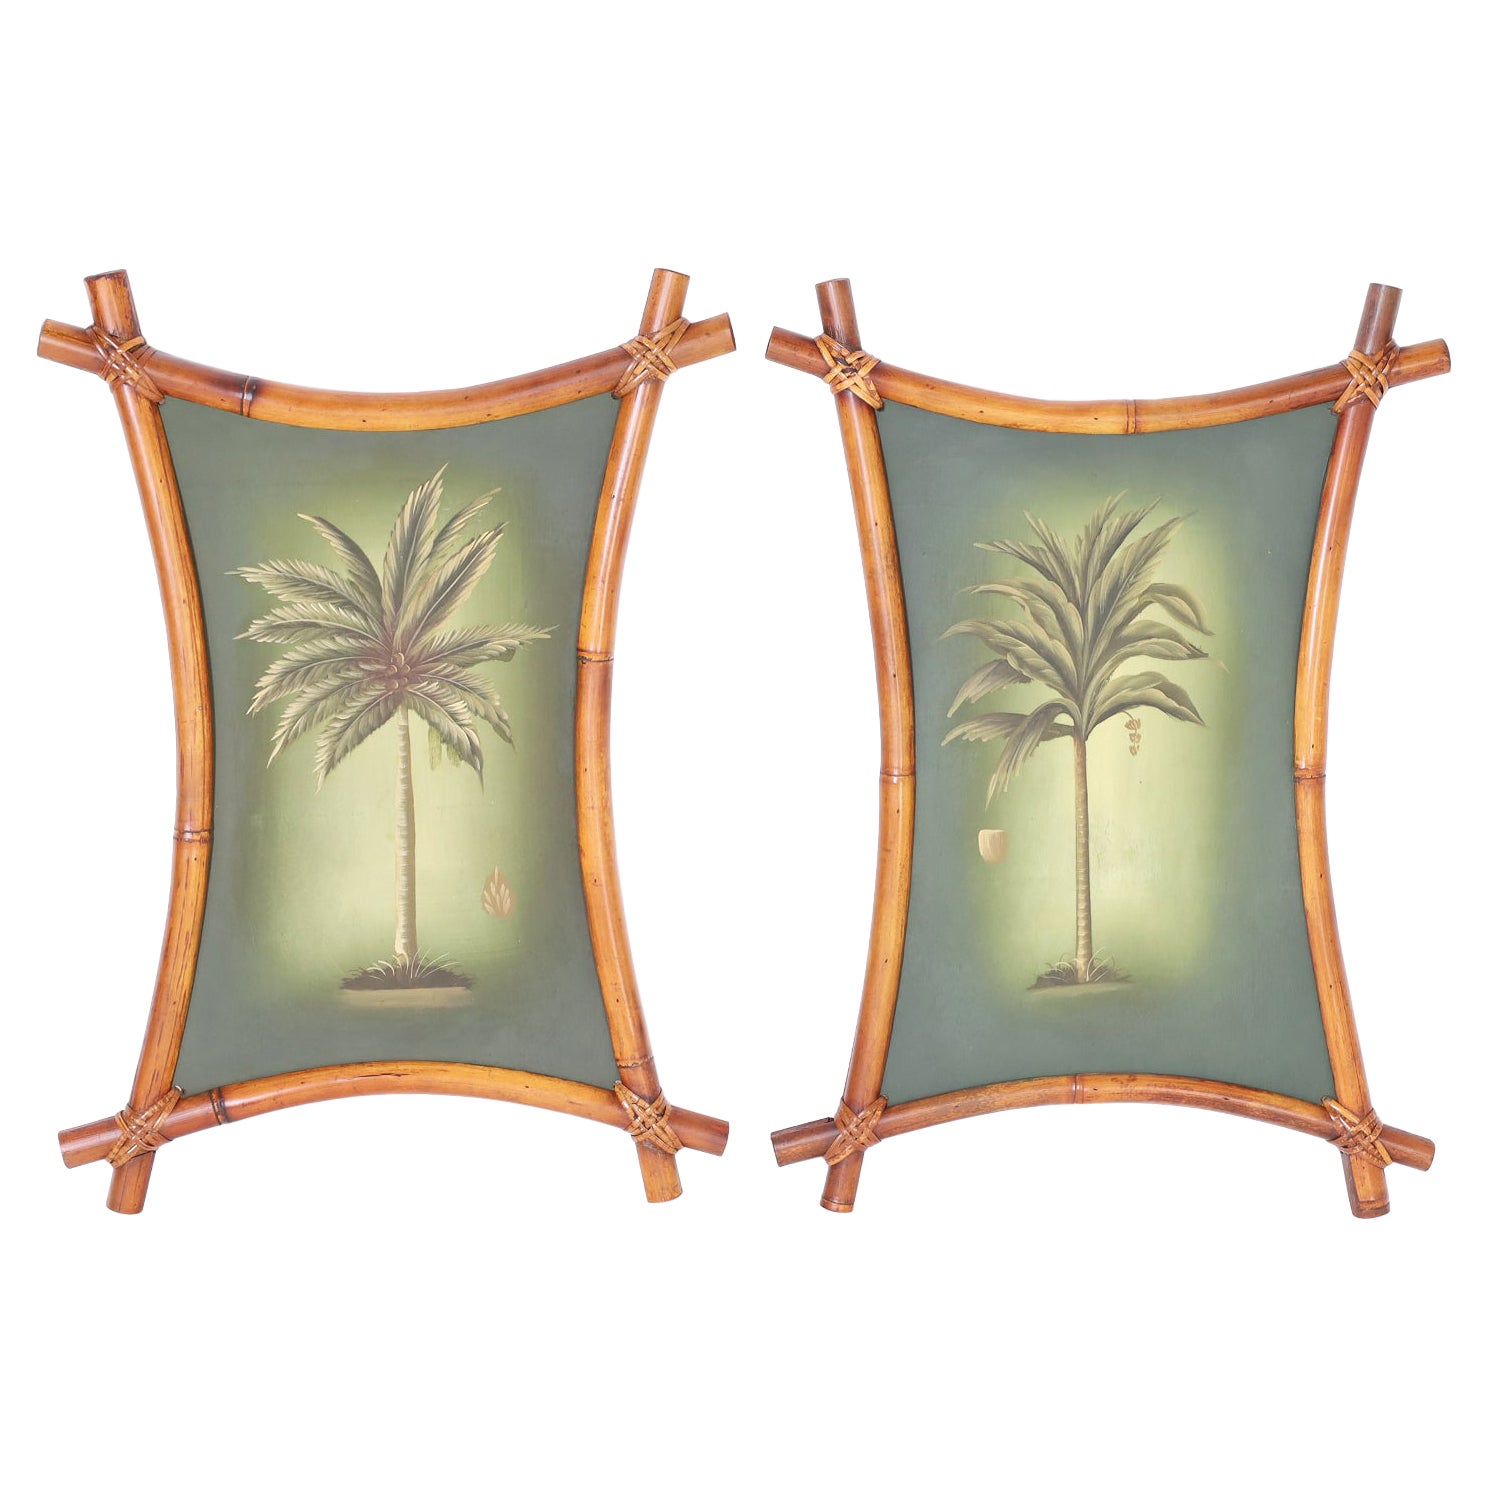 Pair of Palm Tree Paintings in Bamboo Frames